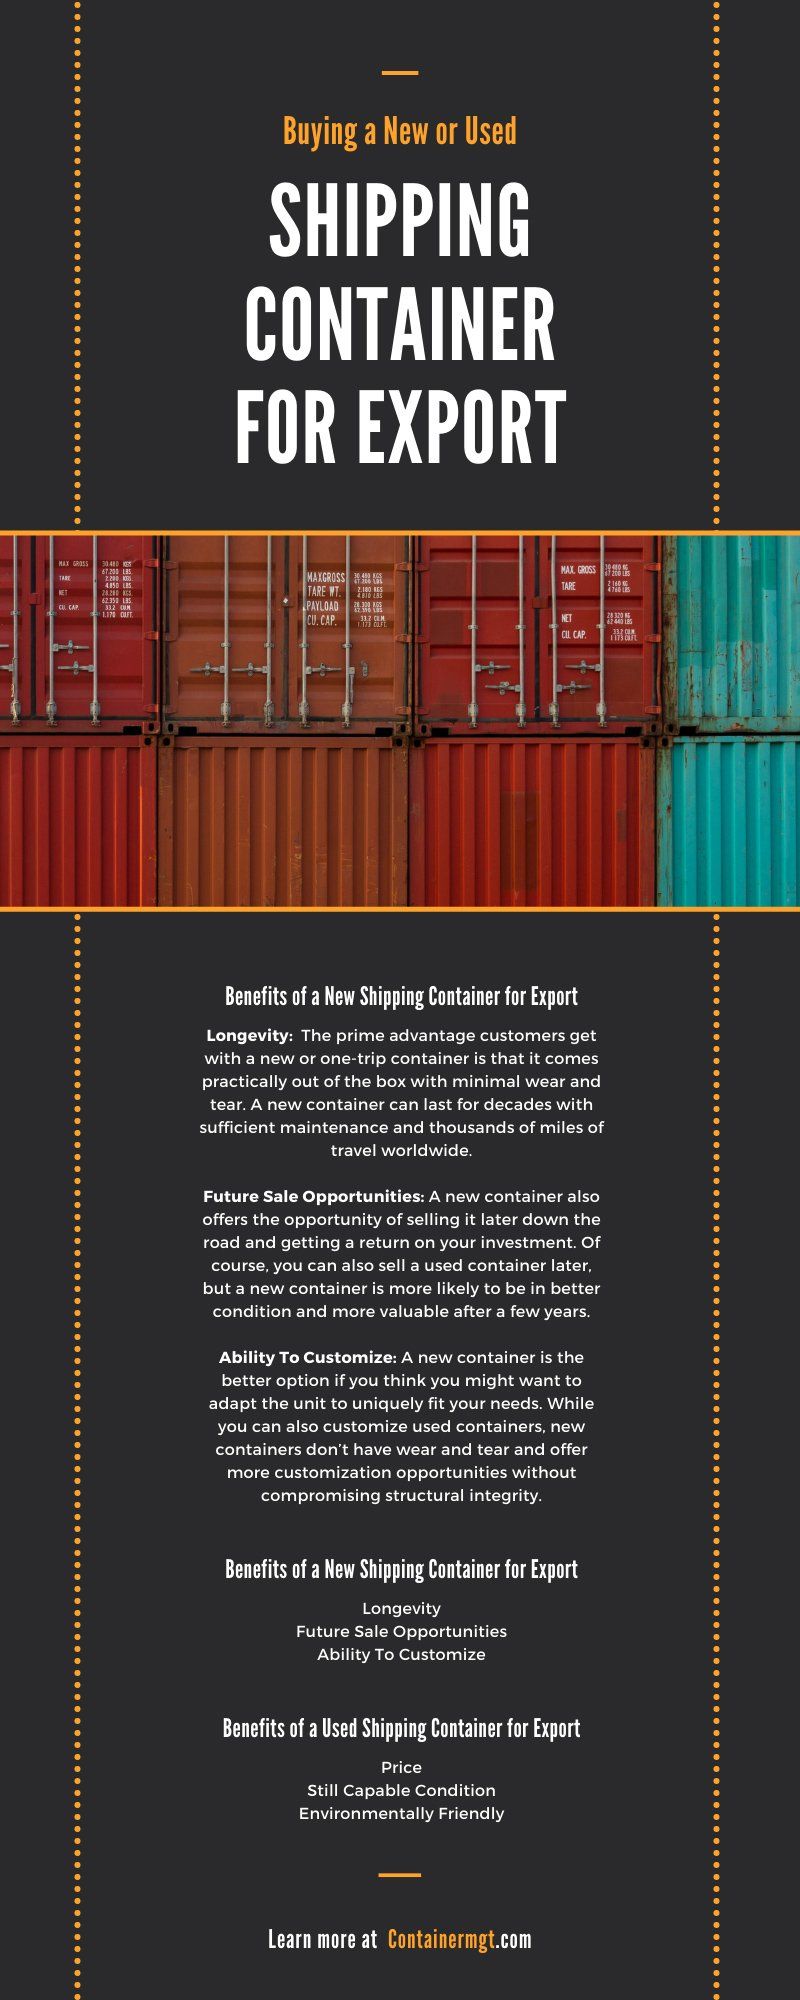 Buying a New or Used Shipping Container for Export